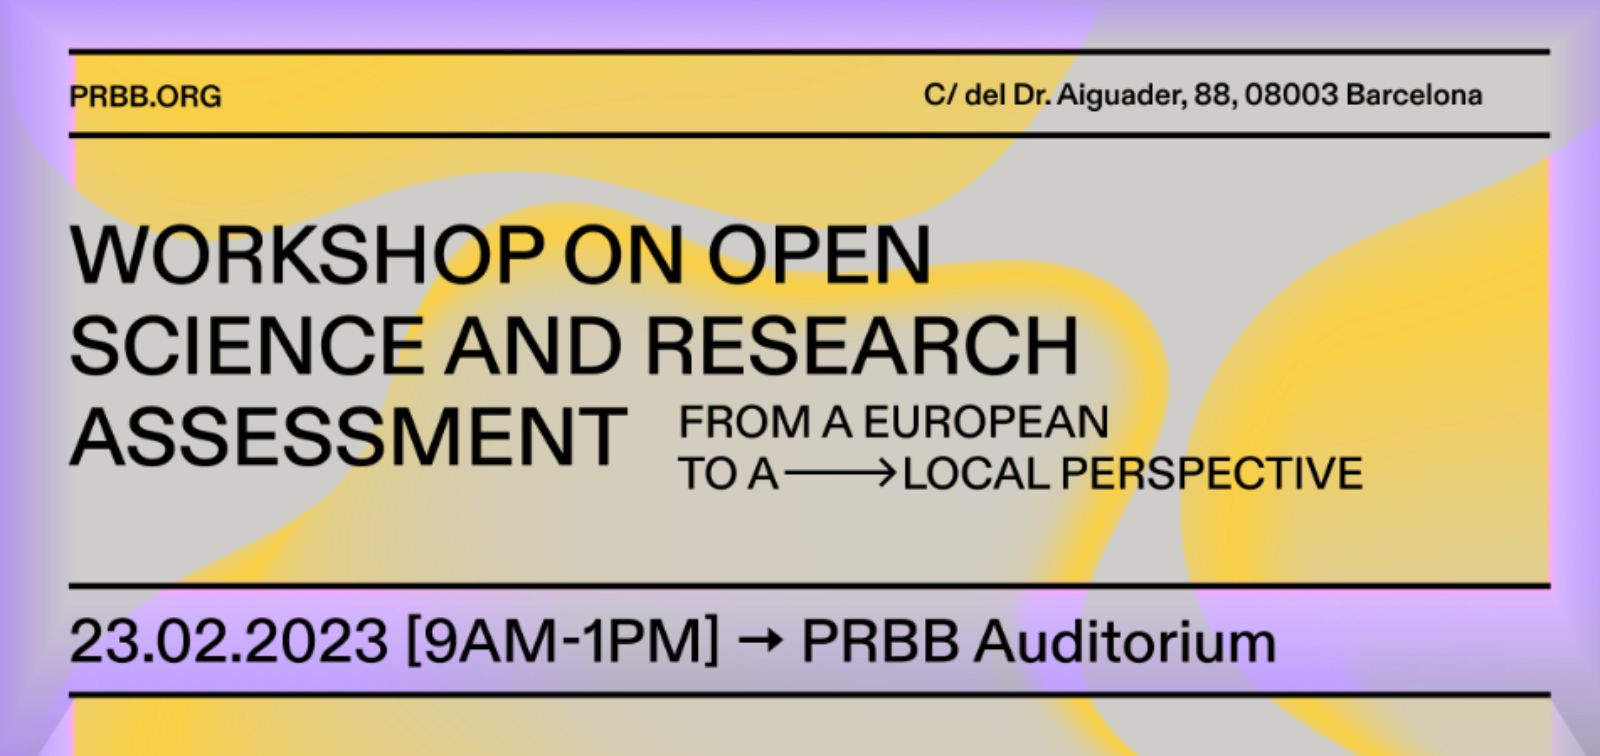 Open science and research assessment workshop